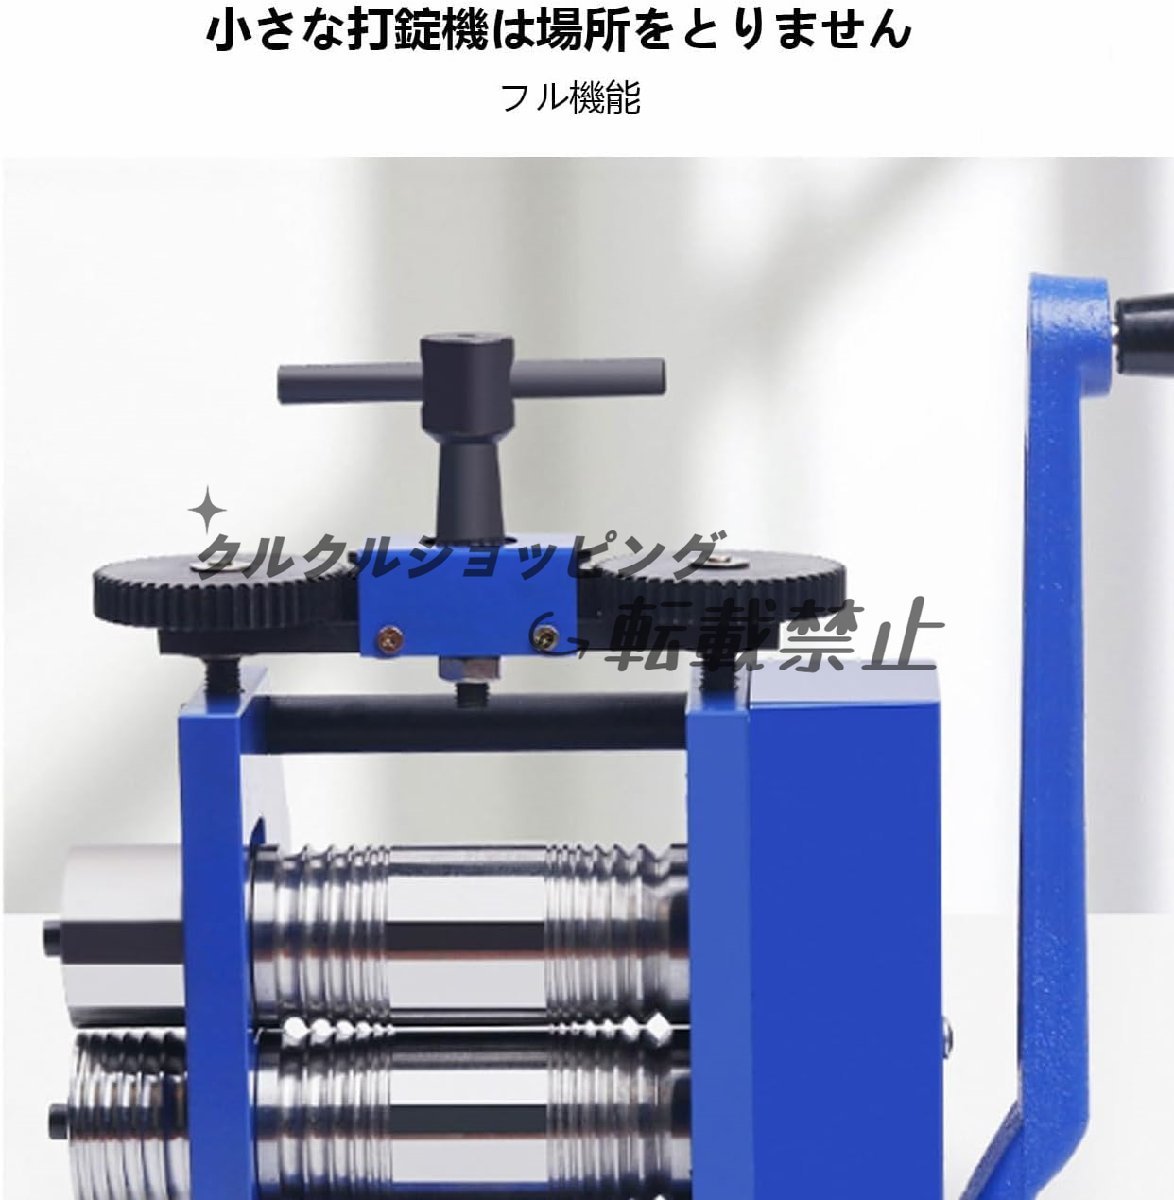  manual pressure . machine manual low ring Mill machine engraving roller steel comfort . possible to use assembly . easy. rust prevention therefore . painting is done tooth car structure 